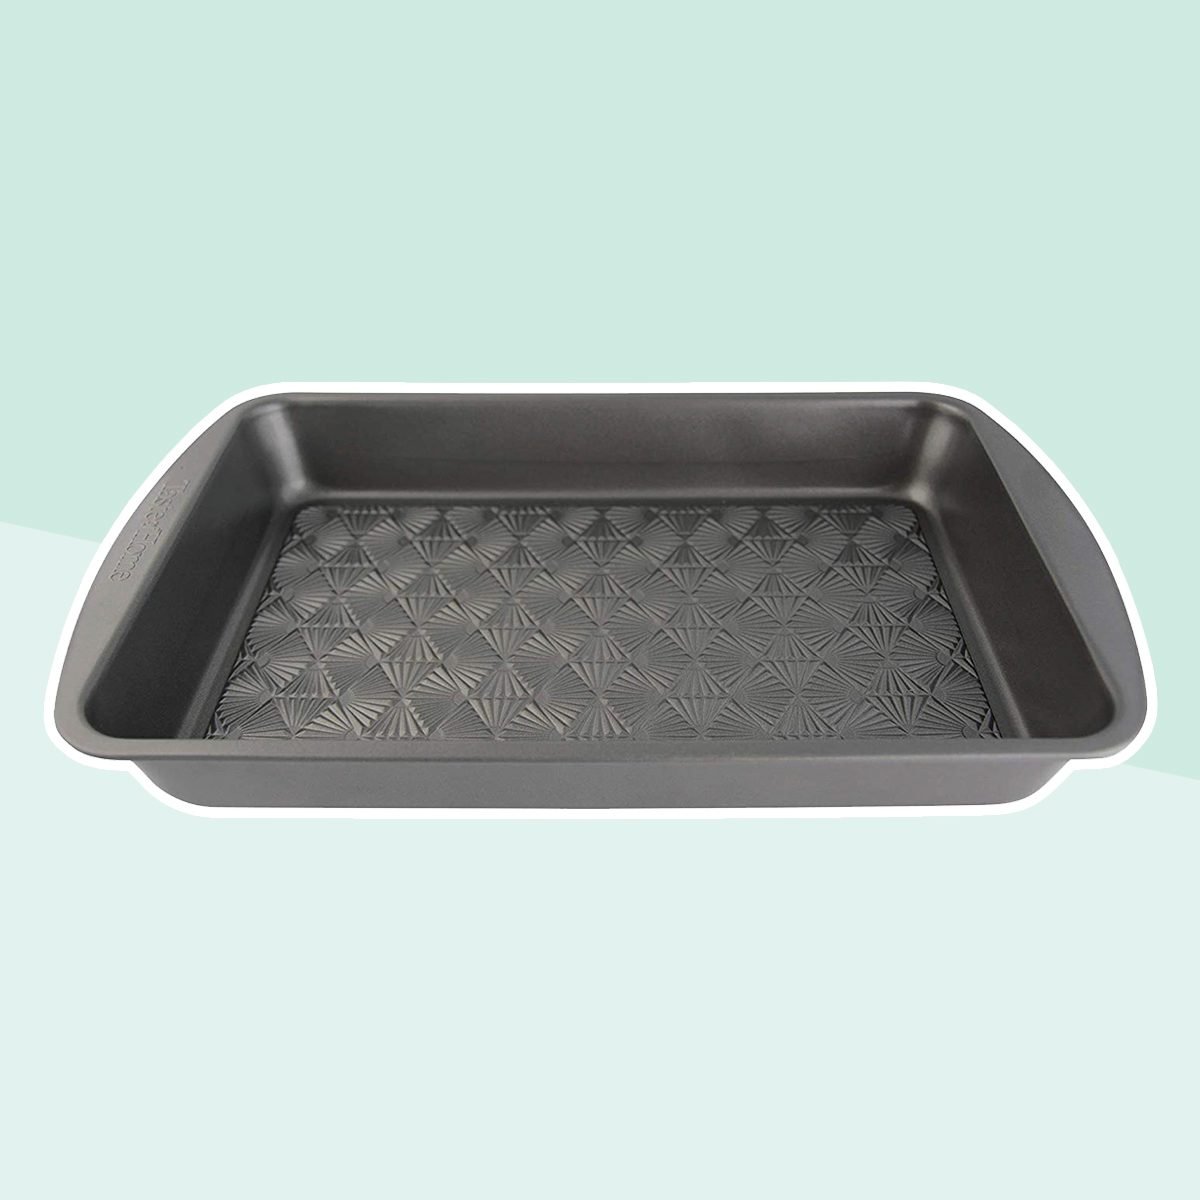 Ayesha Curry Nonstick Bakeware Nonstick Baking Pan With Lid / Nonstick Cake  Pan With Lid, Rectangle - 9 Inch x 13 Inch, Brown, Copper